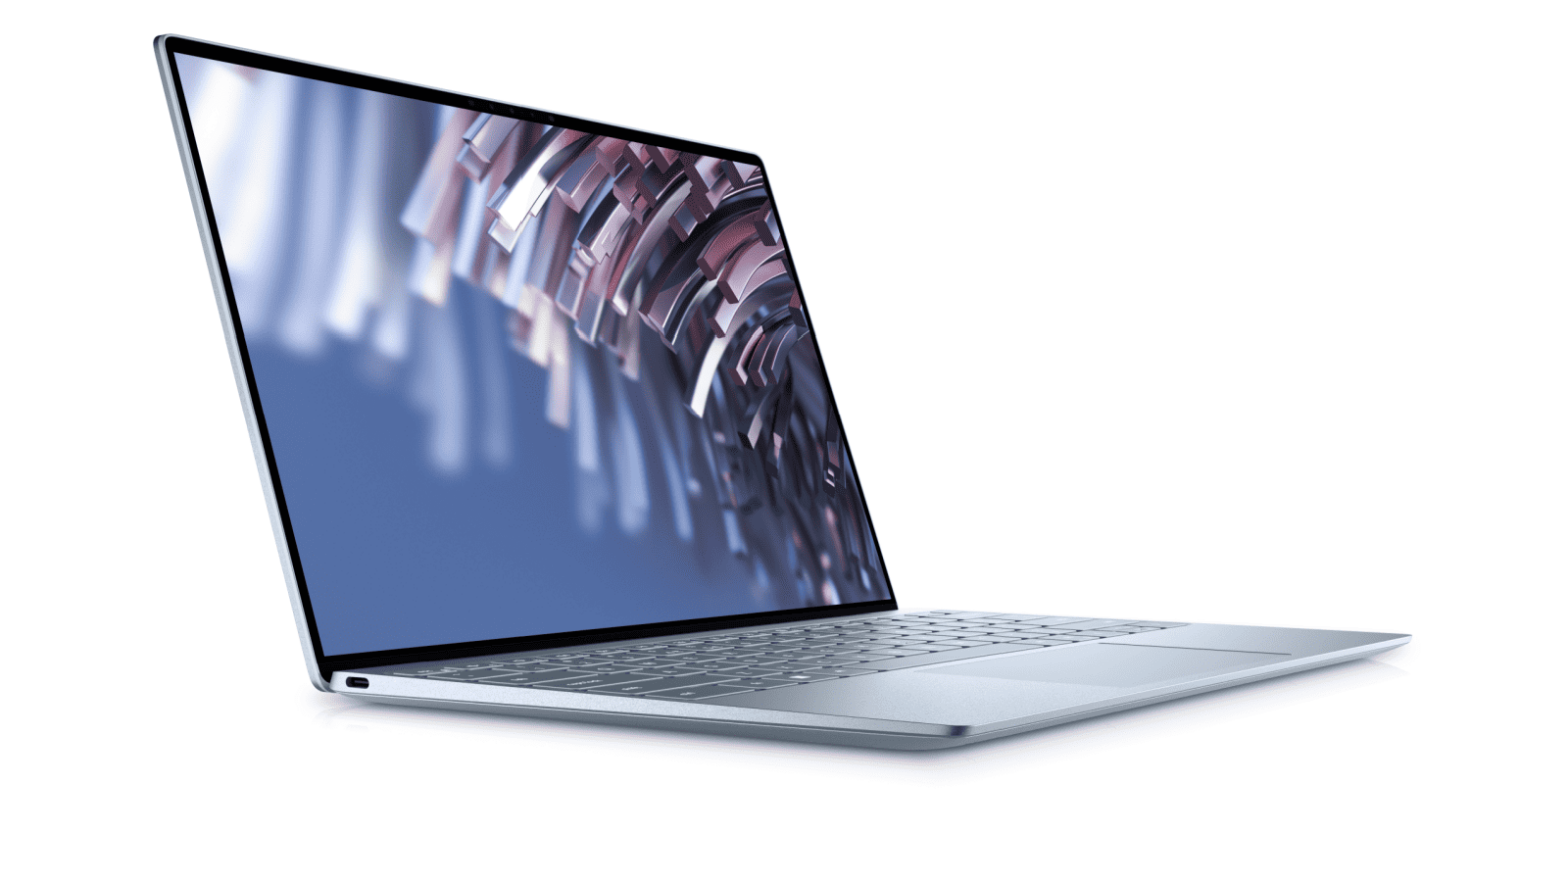 You can't afford to miss this Dell XPS 13 Labor Day Deal